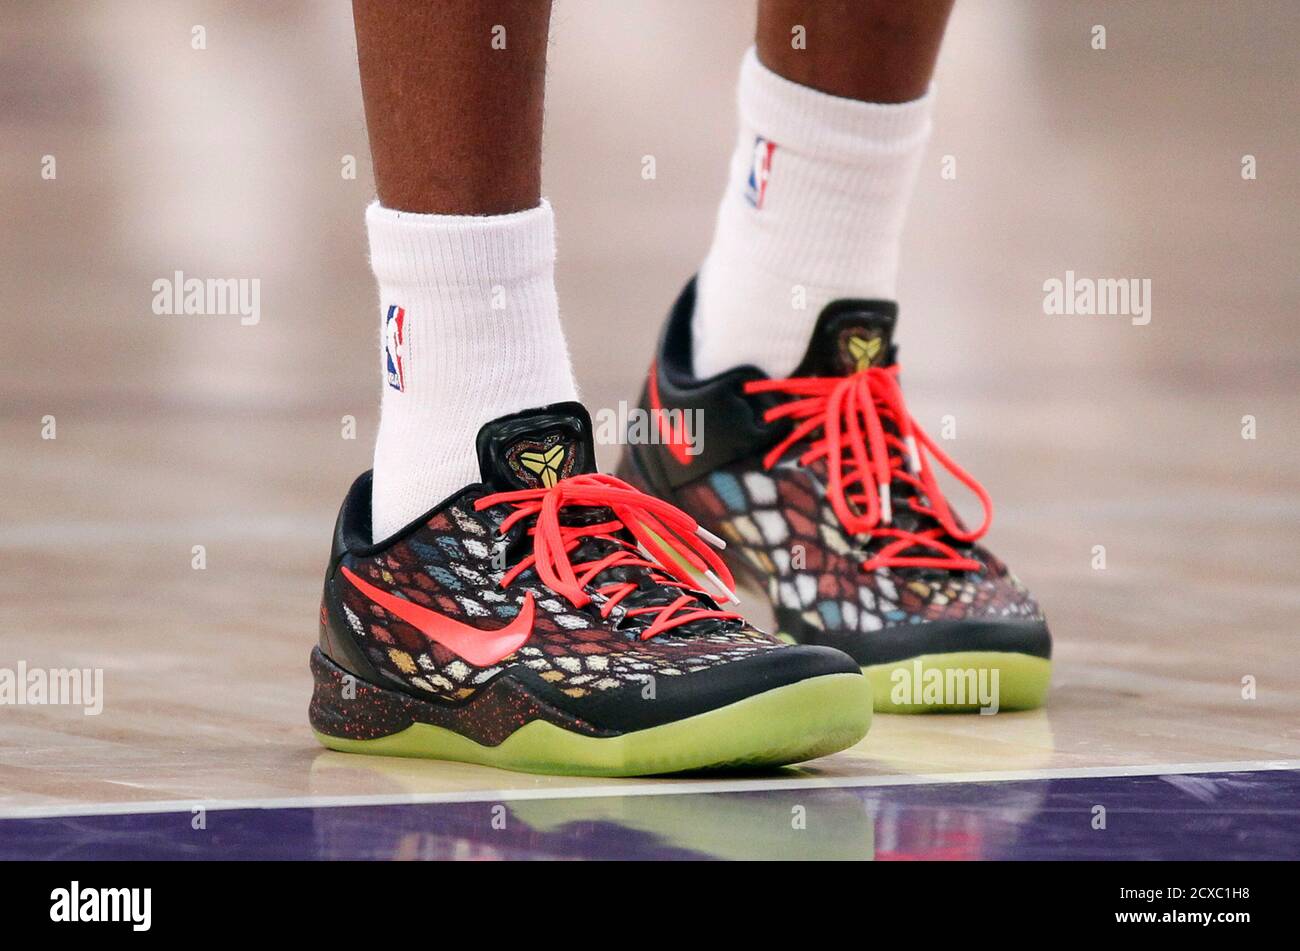 Los Angeles Lakers' Kobe Bryant wears a Christmas Day holiday season  version of the Nike Kobe 8 System basketball shoes, during the NBA  basketball game against the New York Knicks in Los